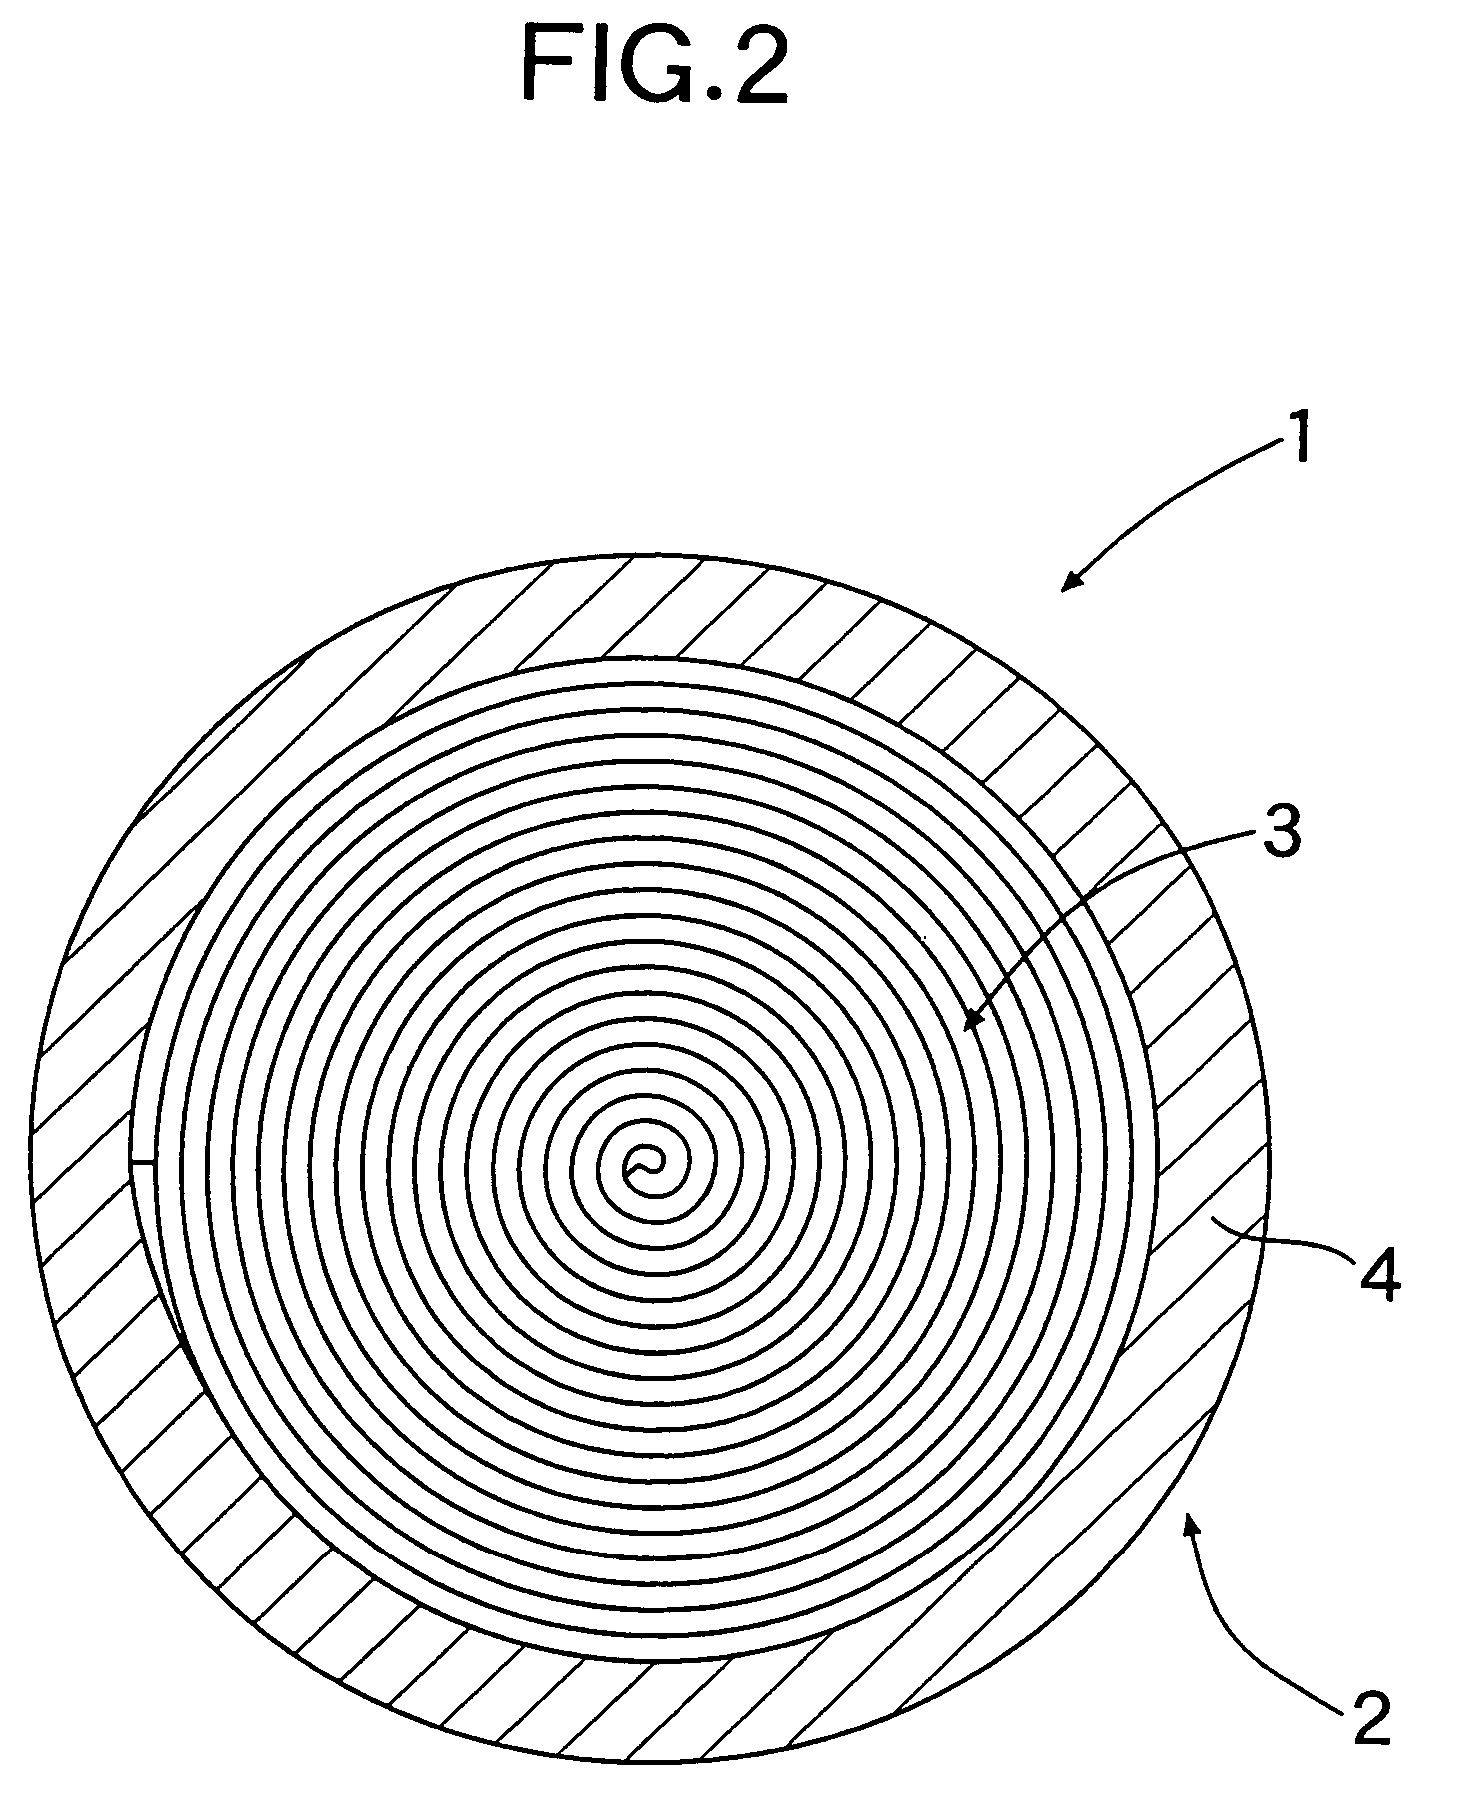 Electrode for electric double-layer capacitor, and slurry for forming the same